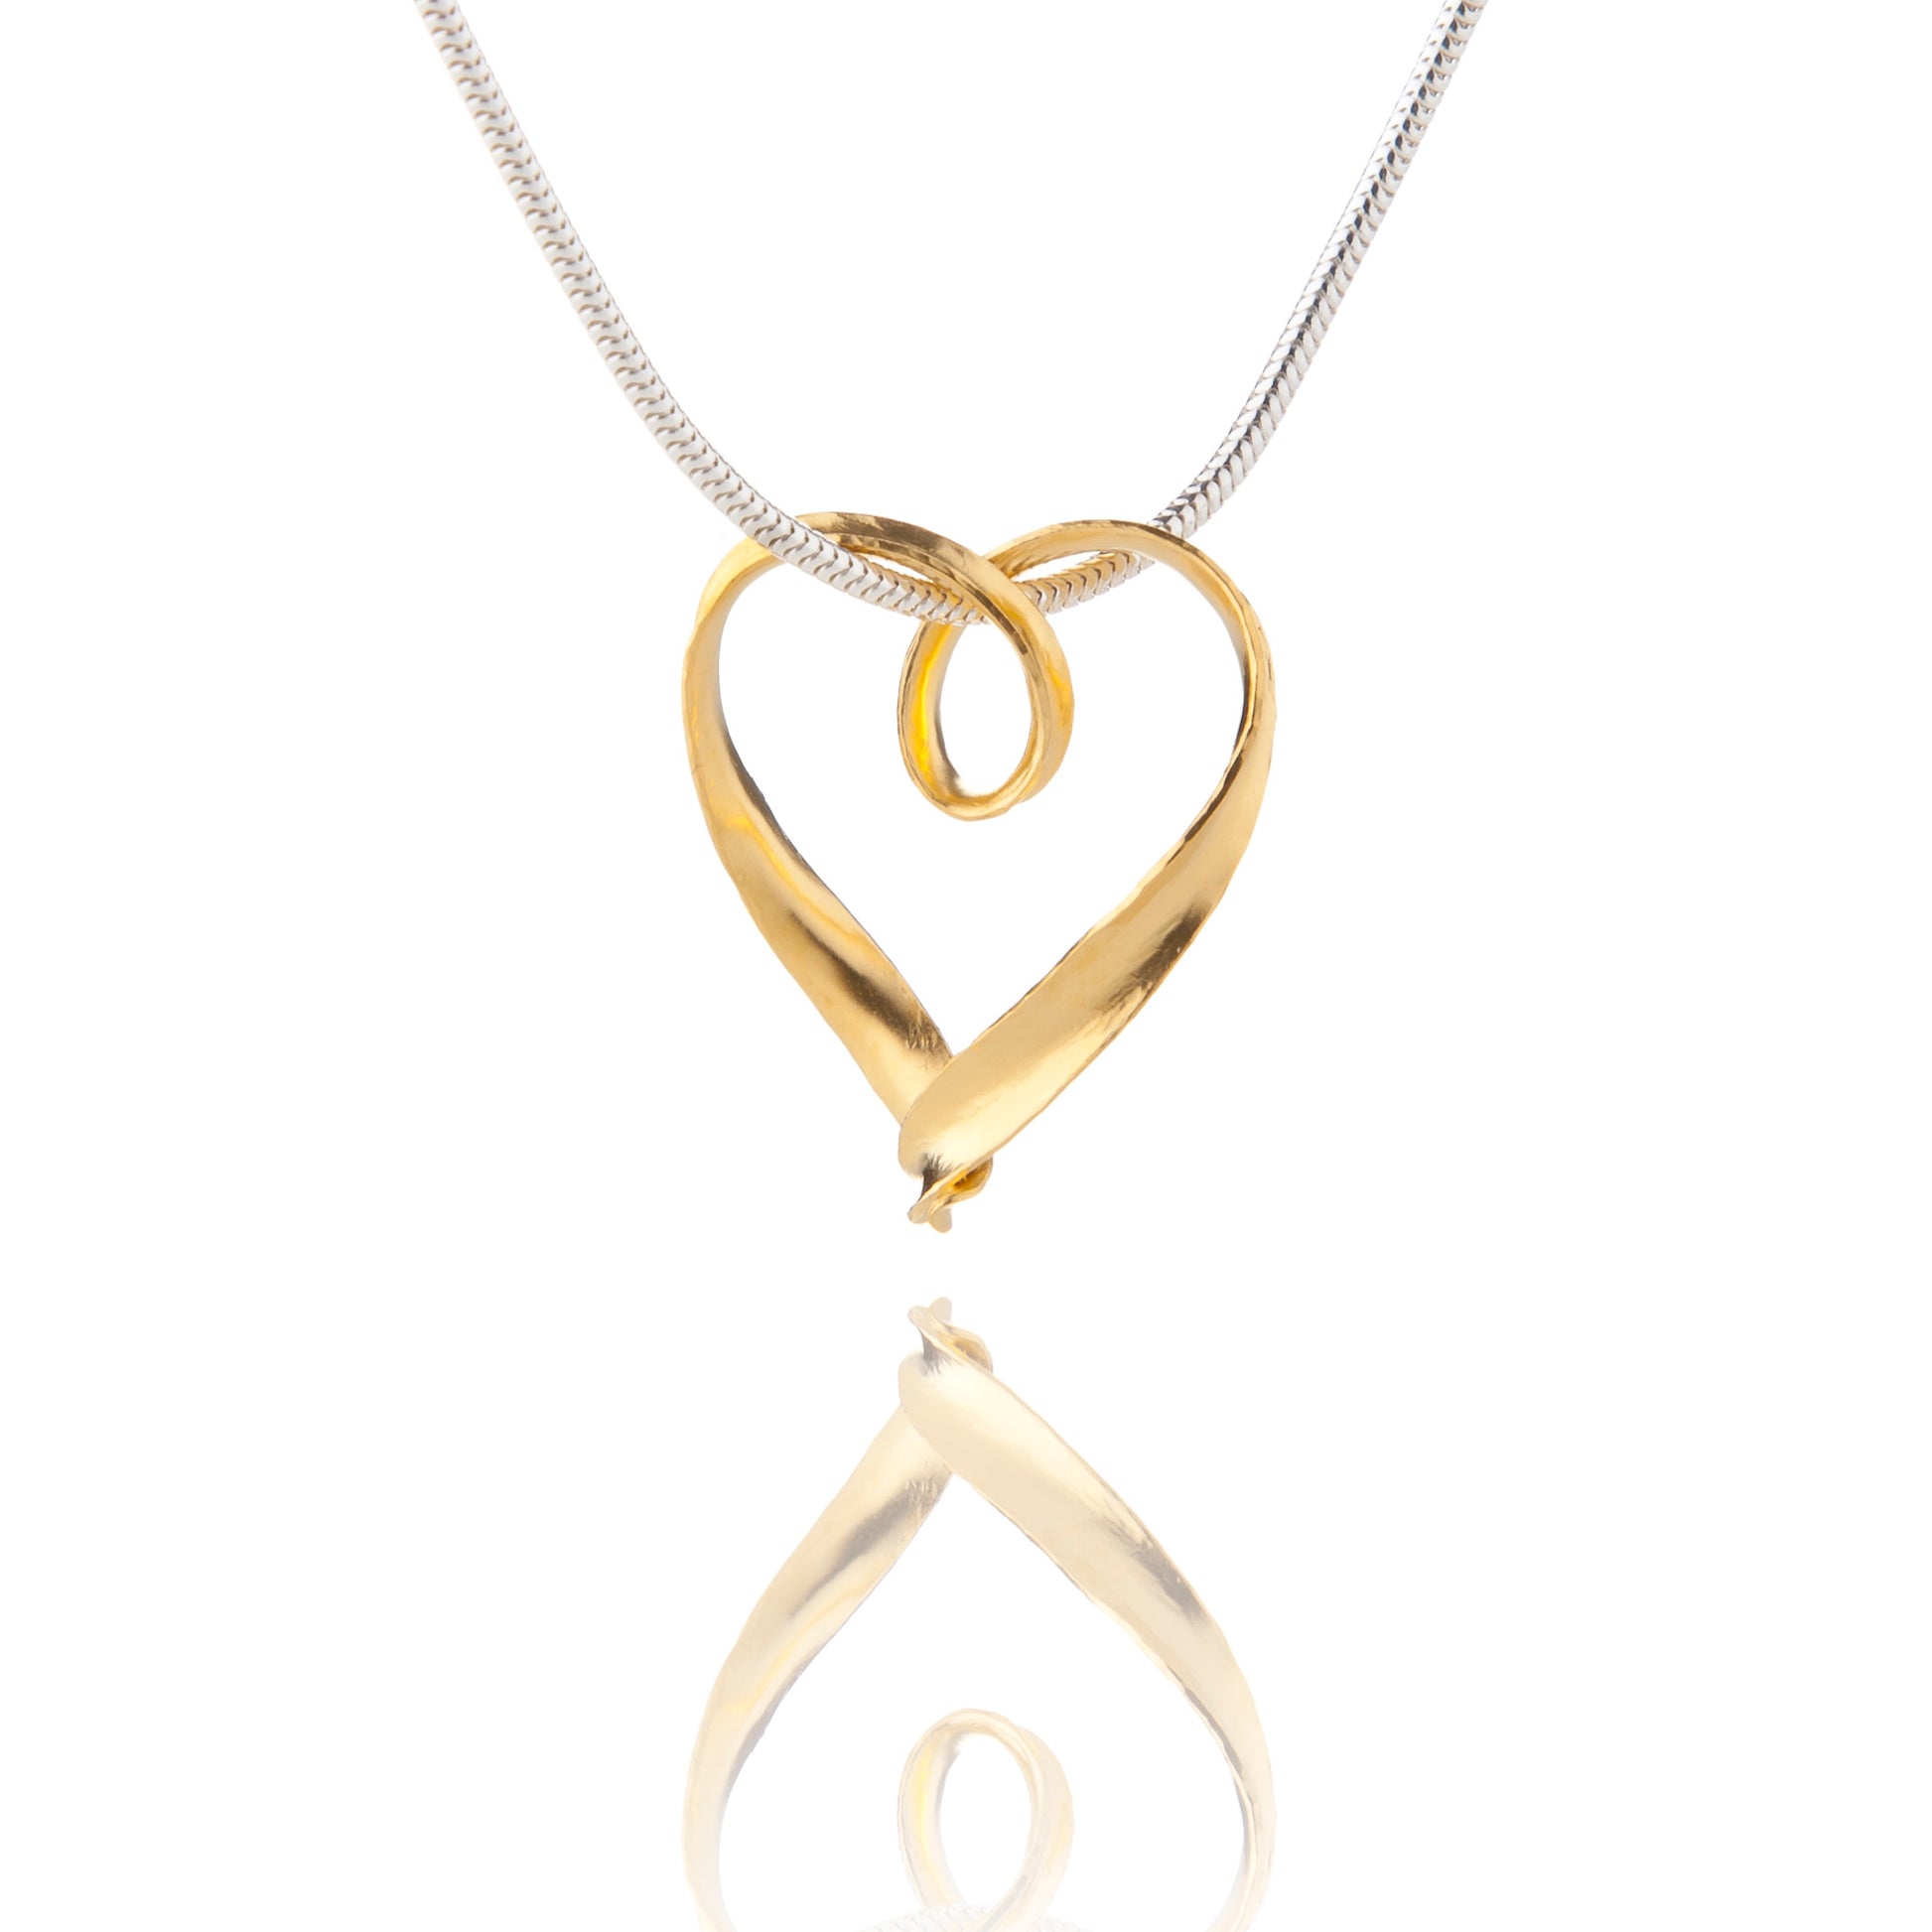 A simple silver heart pendant formed from a continuous strip of recycled silver, thickly plated with yellow gold, hanging from a silver snake chain which passes through a loop in the heart.